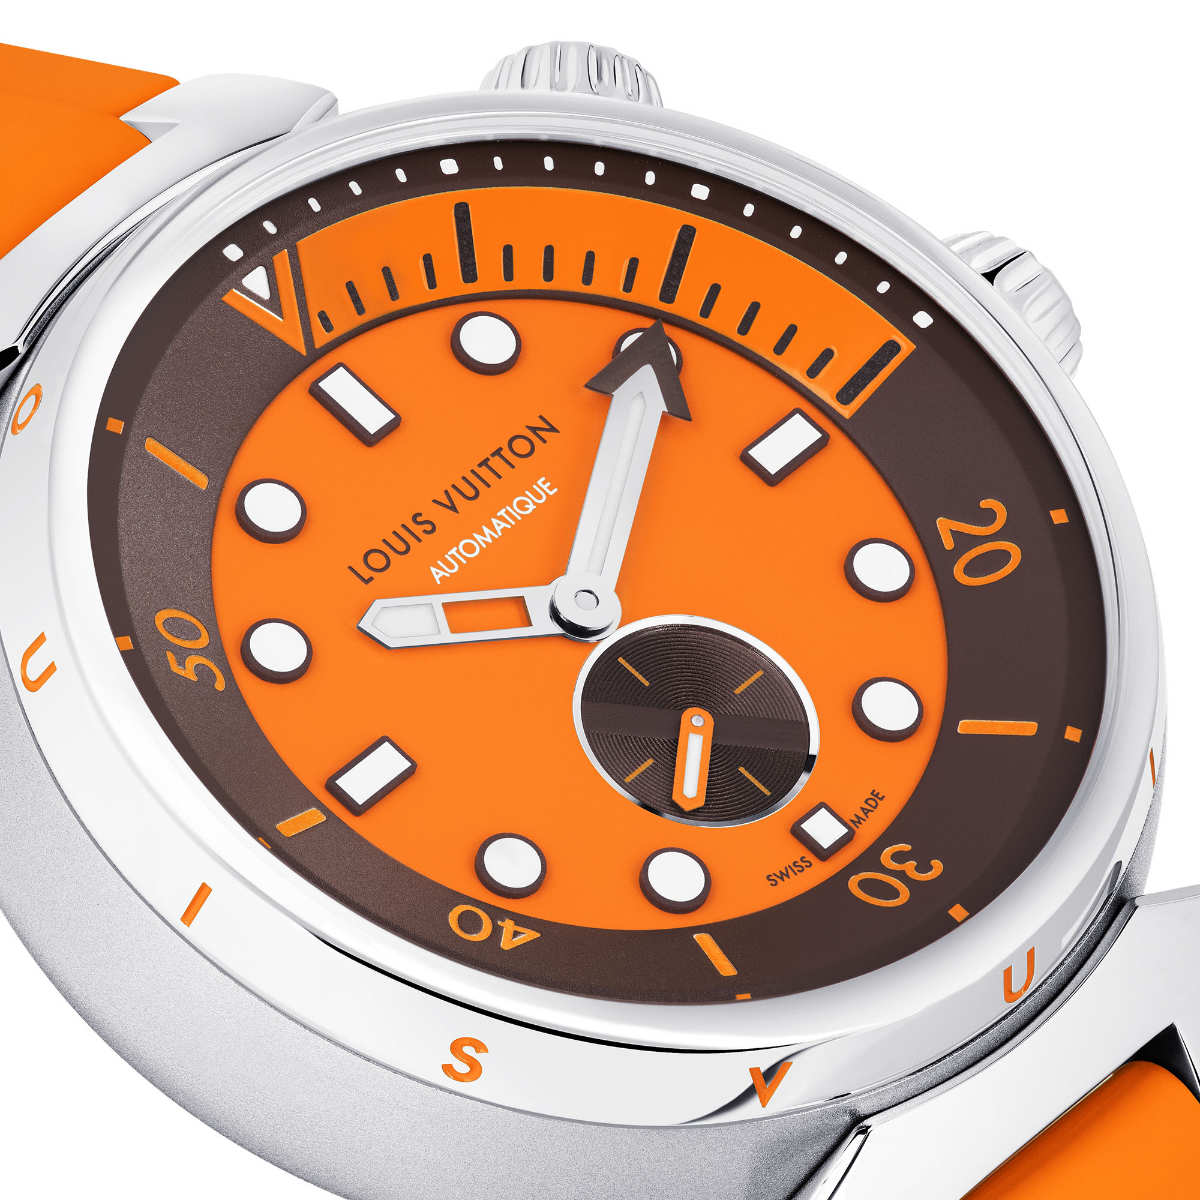 Tambour Street Diver: Two New Looks For The Sporty Urban Timepiece